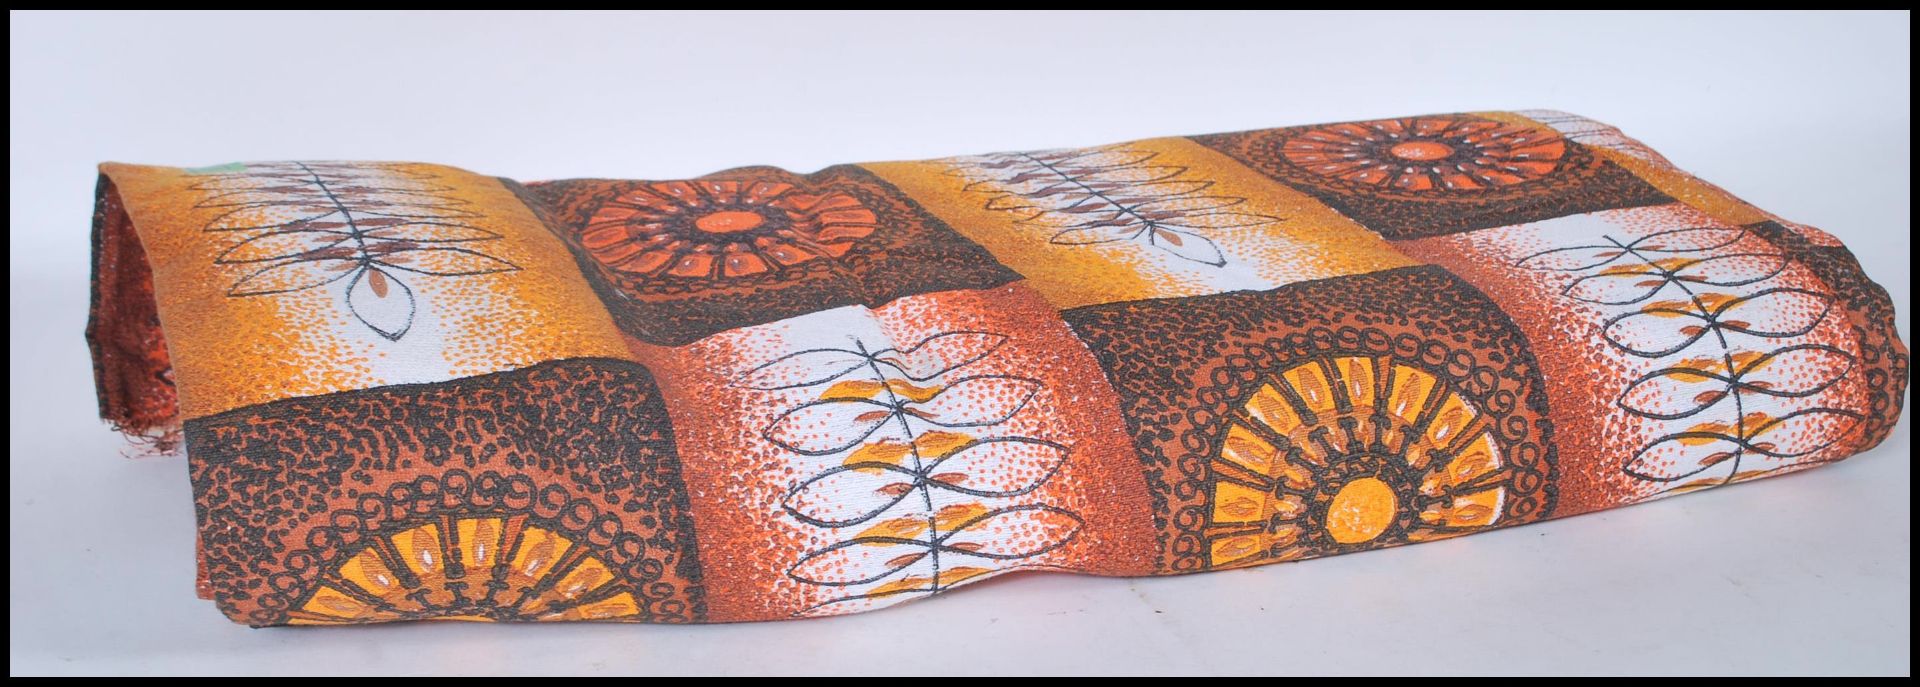 Interior design- A retro mid 20th Century roll of fabric in orange and brown colour with various